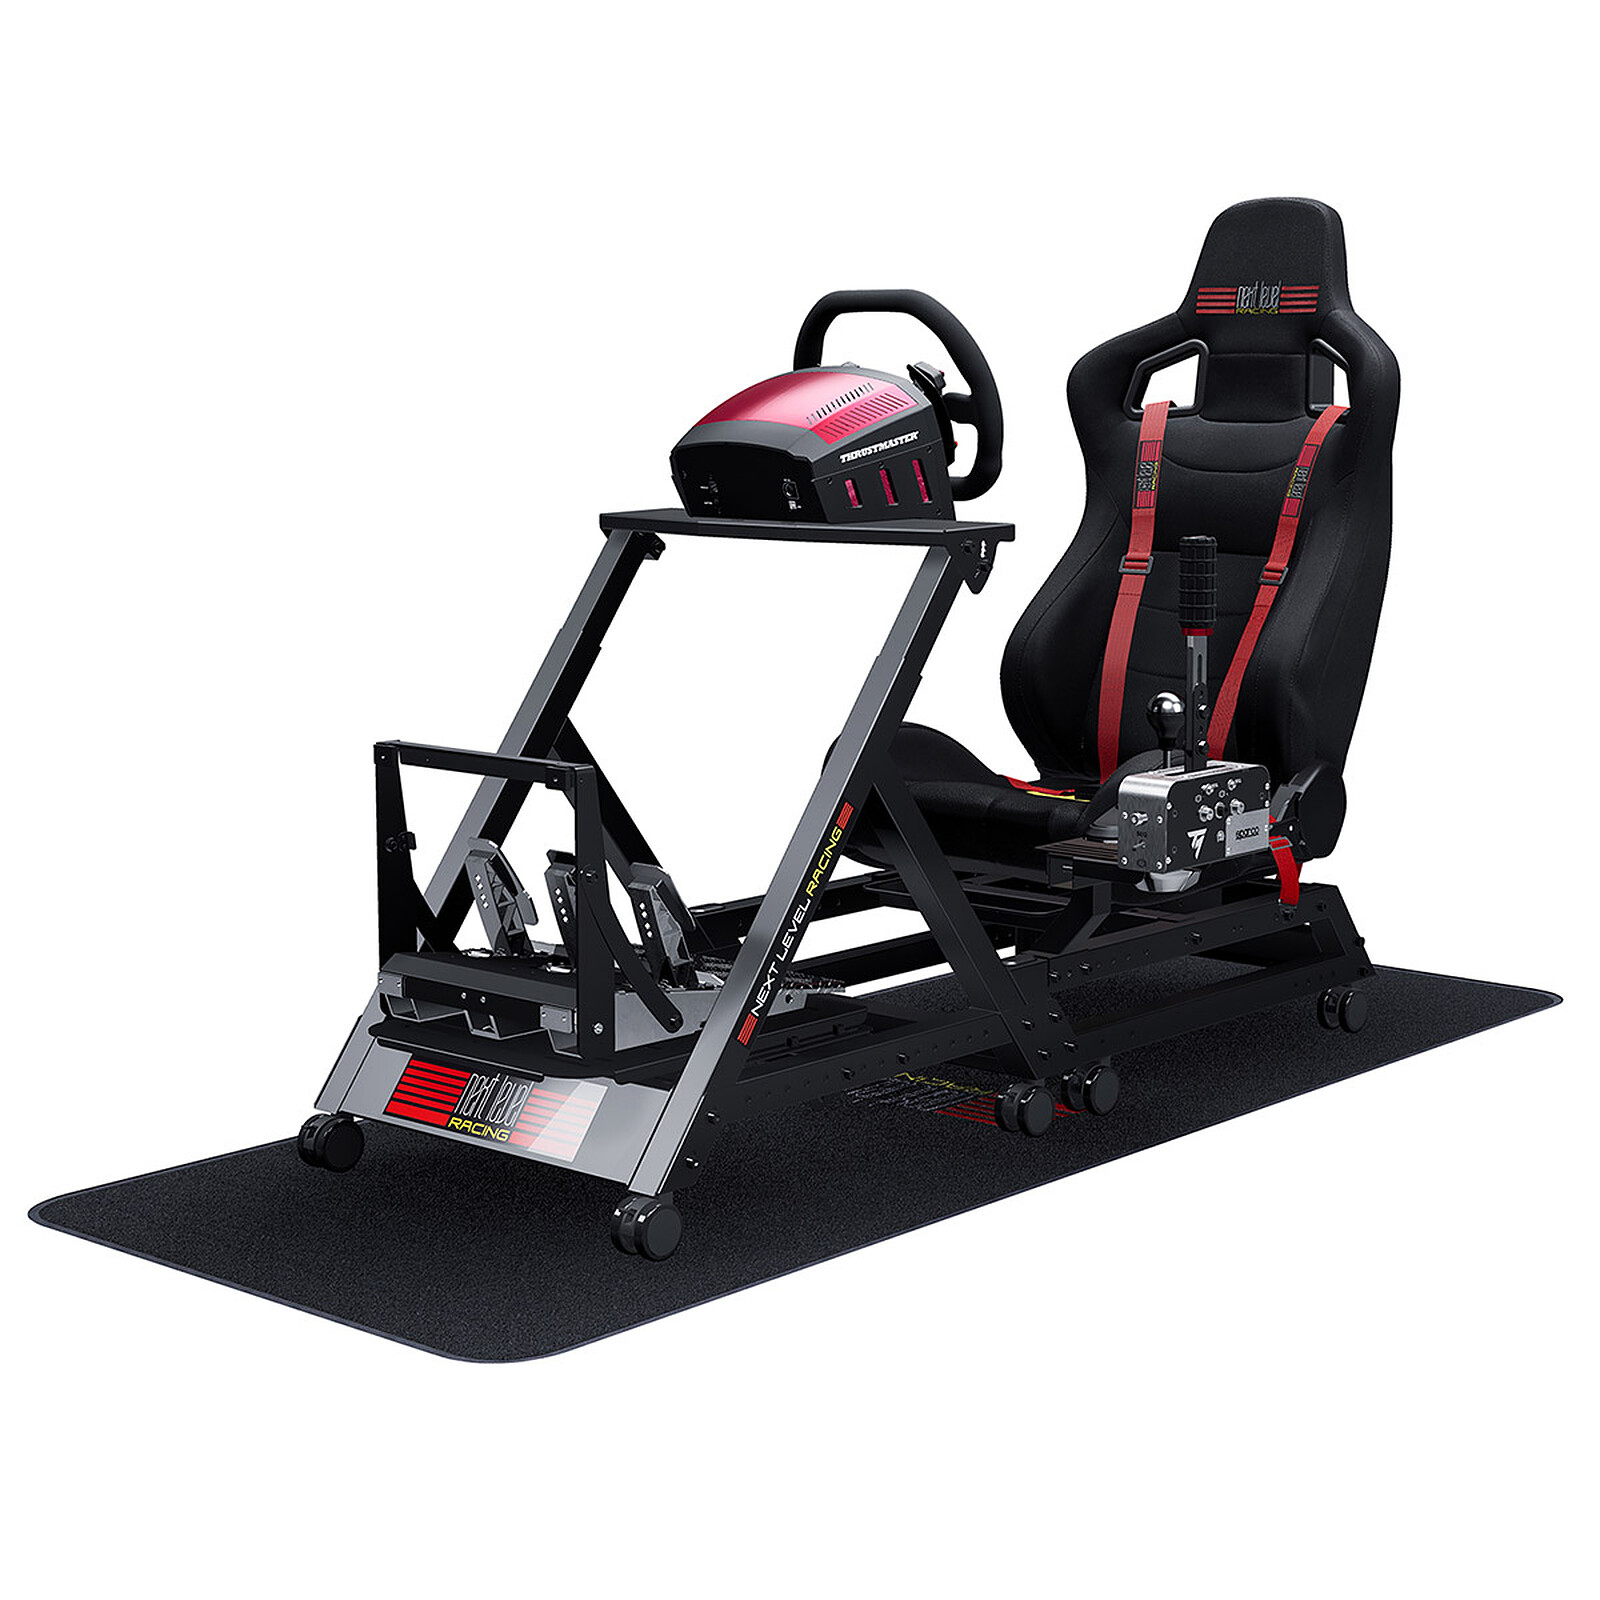 Next Level Racing GTUltimate Keyboard and Mouse Stand - Autres accessoires  jeu - Garantie 3 ans LDLC